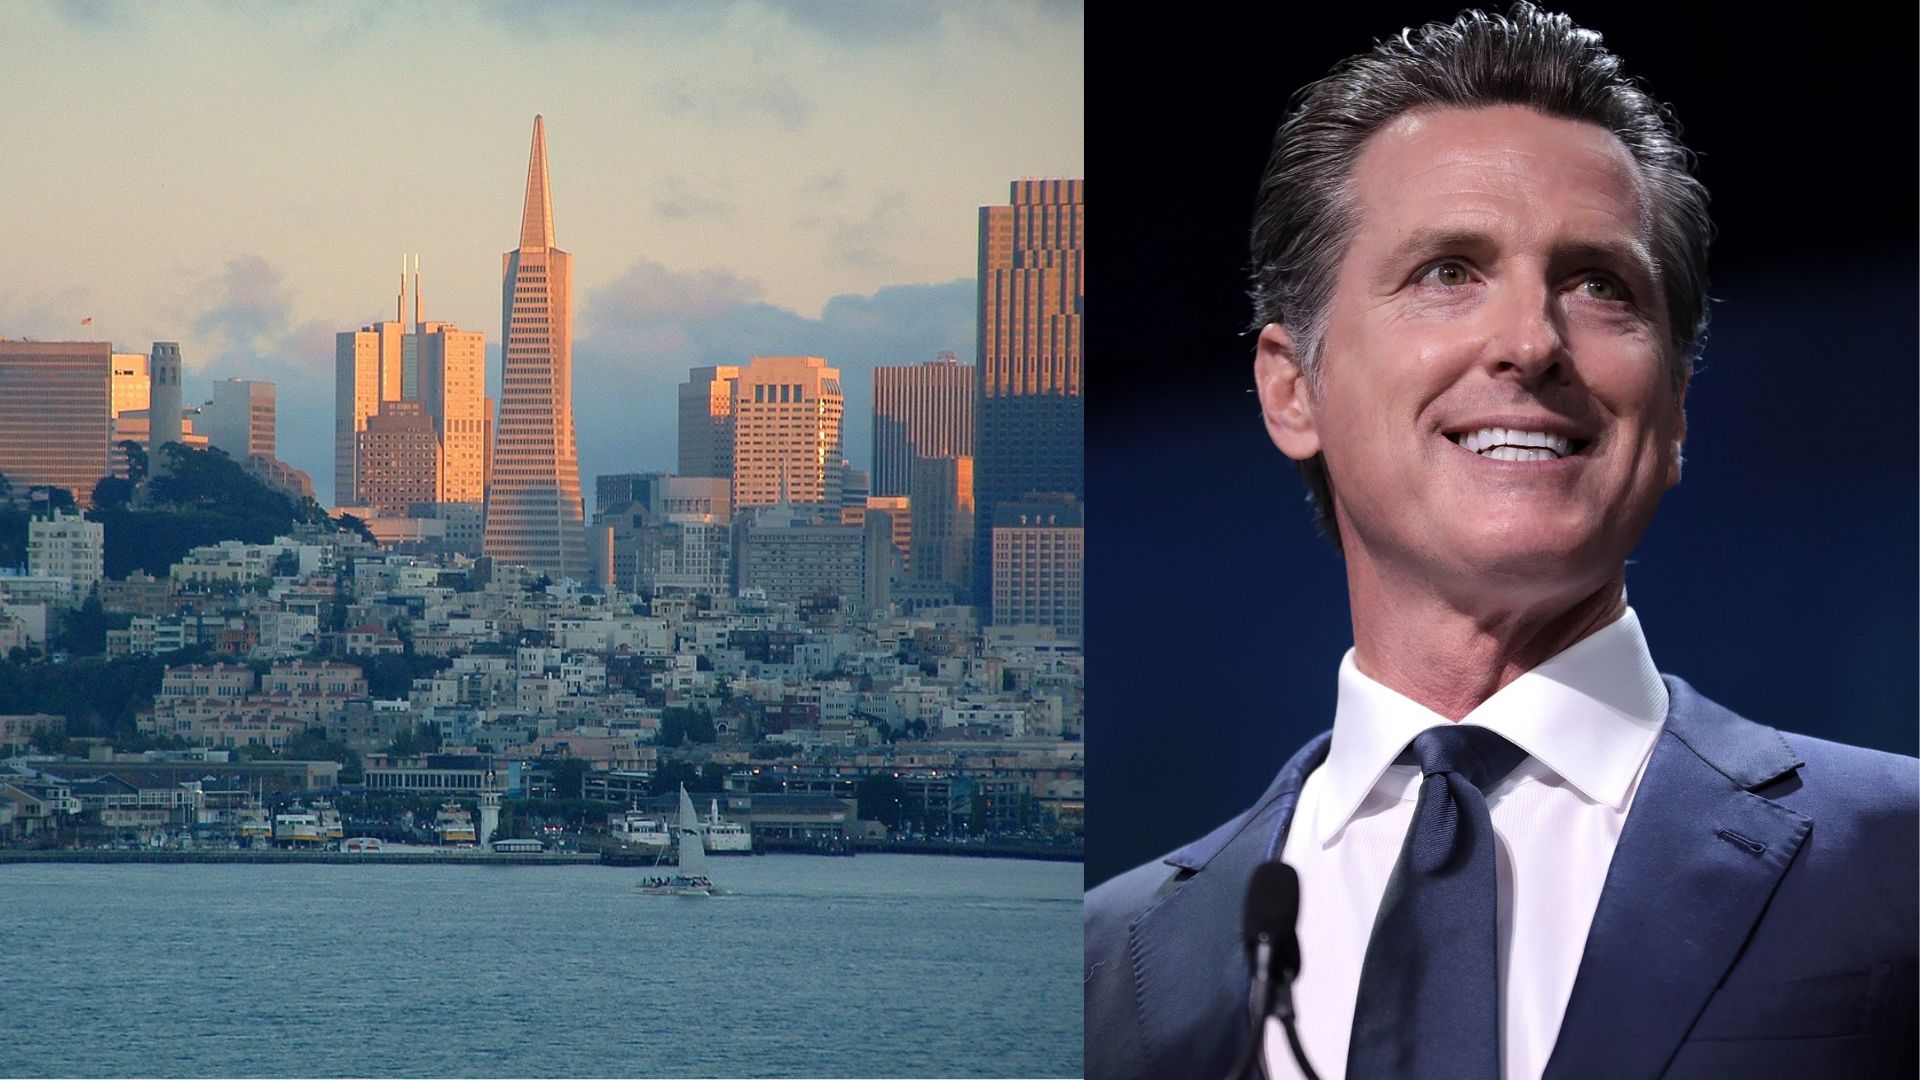 An image of the city of San Francisco during a cloudy afternoon/Governor of California Gavin Newsom